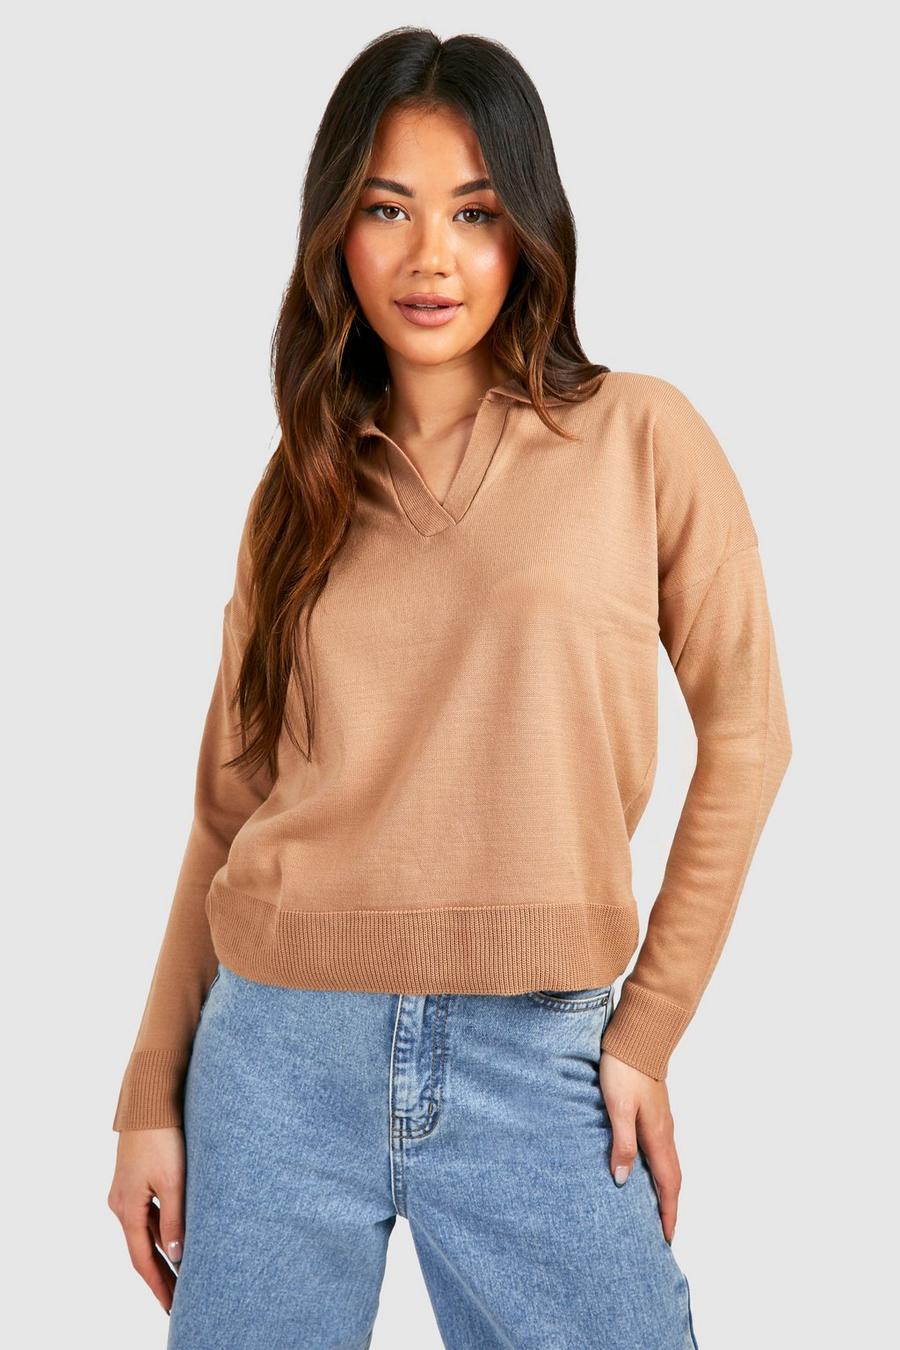 Camel Collared Sweater